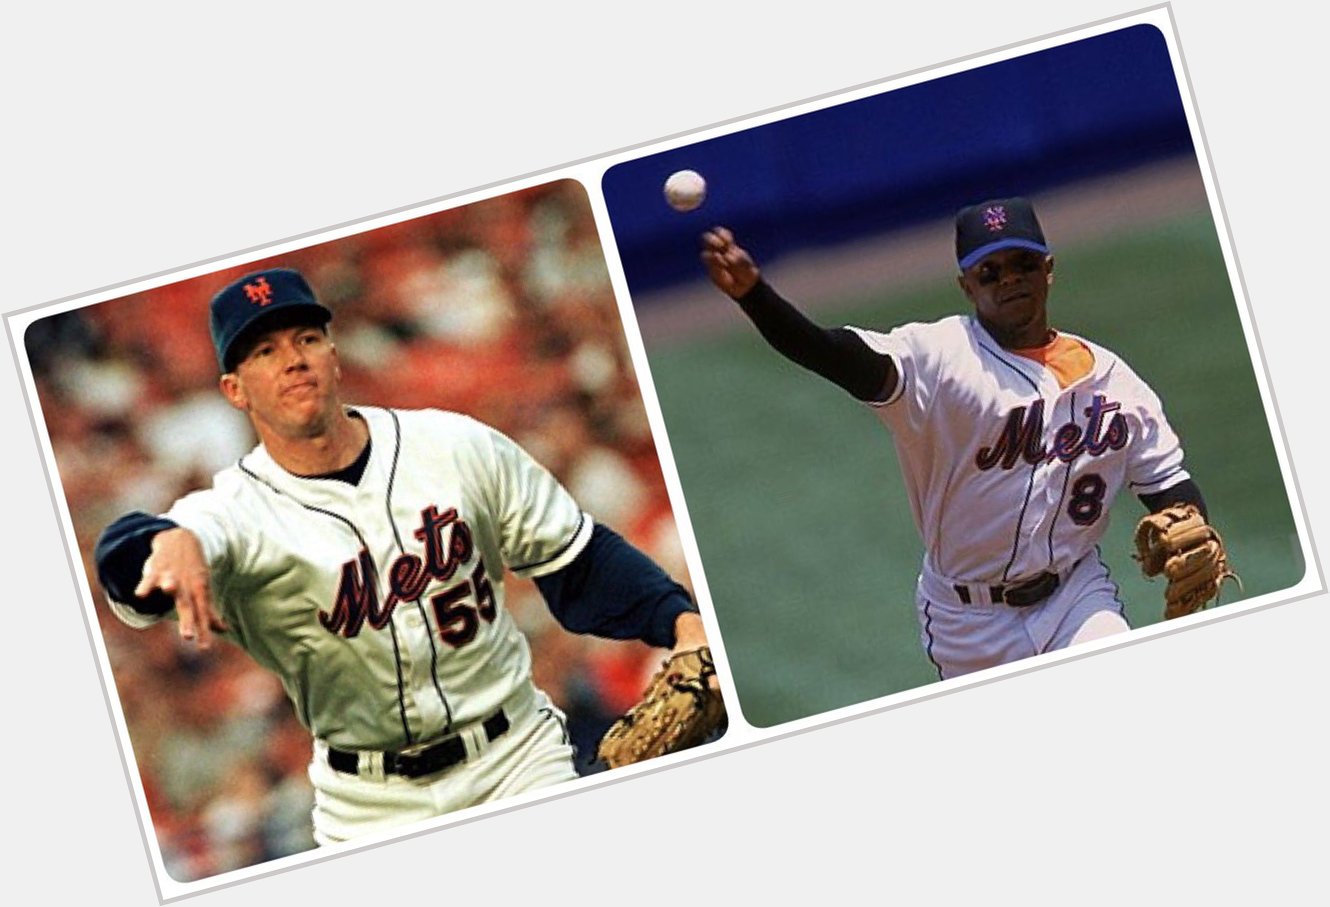 Happy Birthday wishes to former Orel Hershiser (59) and Desi Relaford (44). 